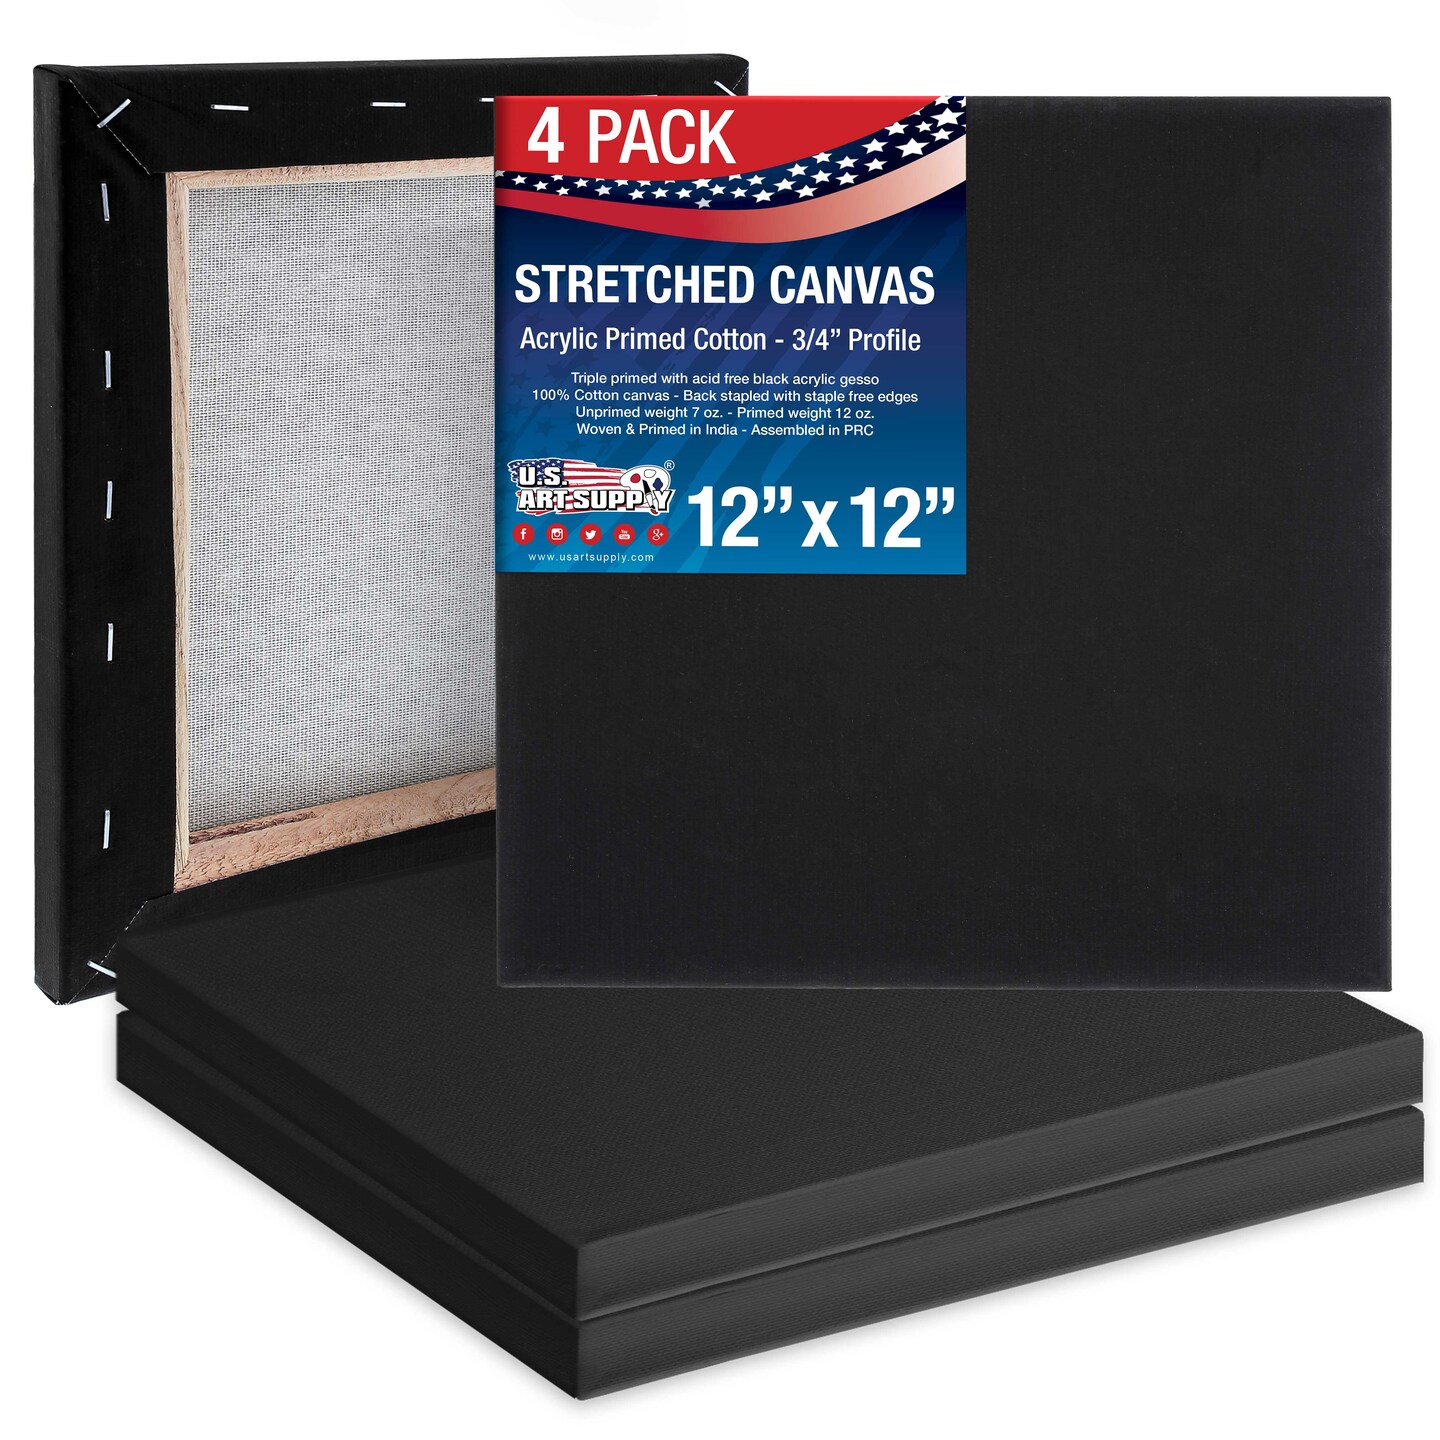 12 x 12 inch Black Stretched Canvas 12-Ounce Primed, 4-Pack - Professional Artist Quality 3/4&#x22; Profile, 100% Cotton, Heavy-Weight, Gesso